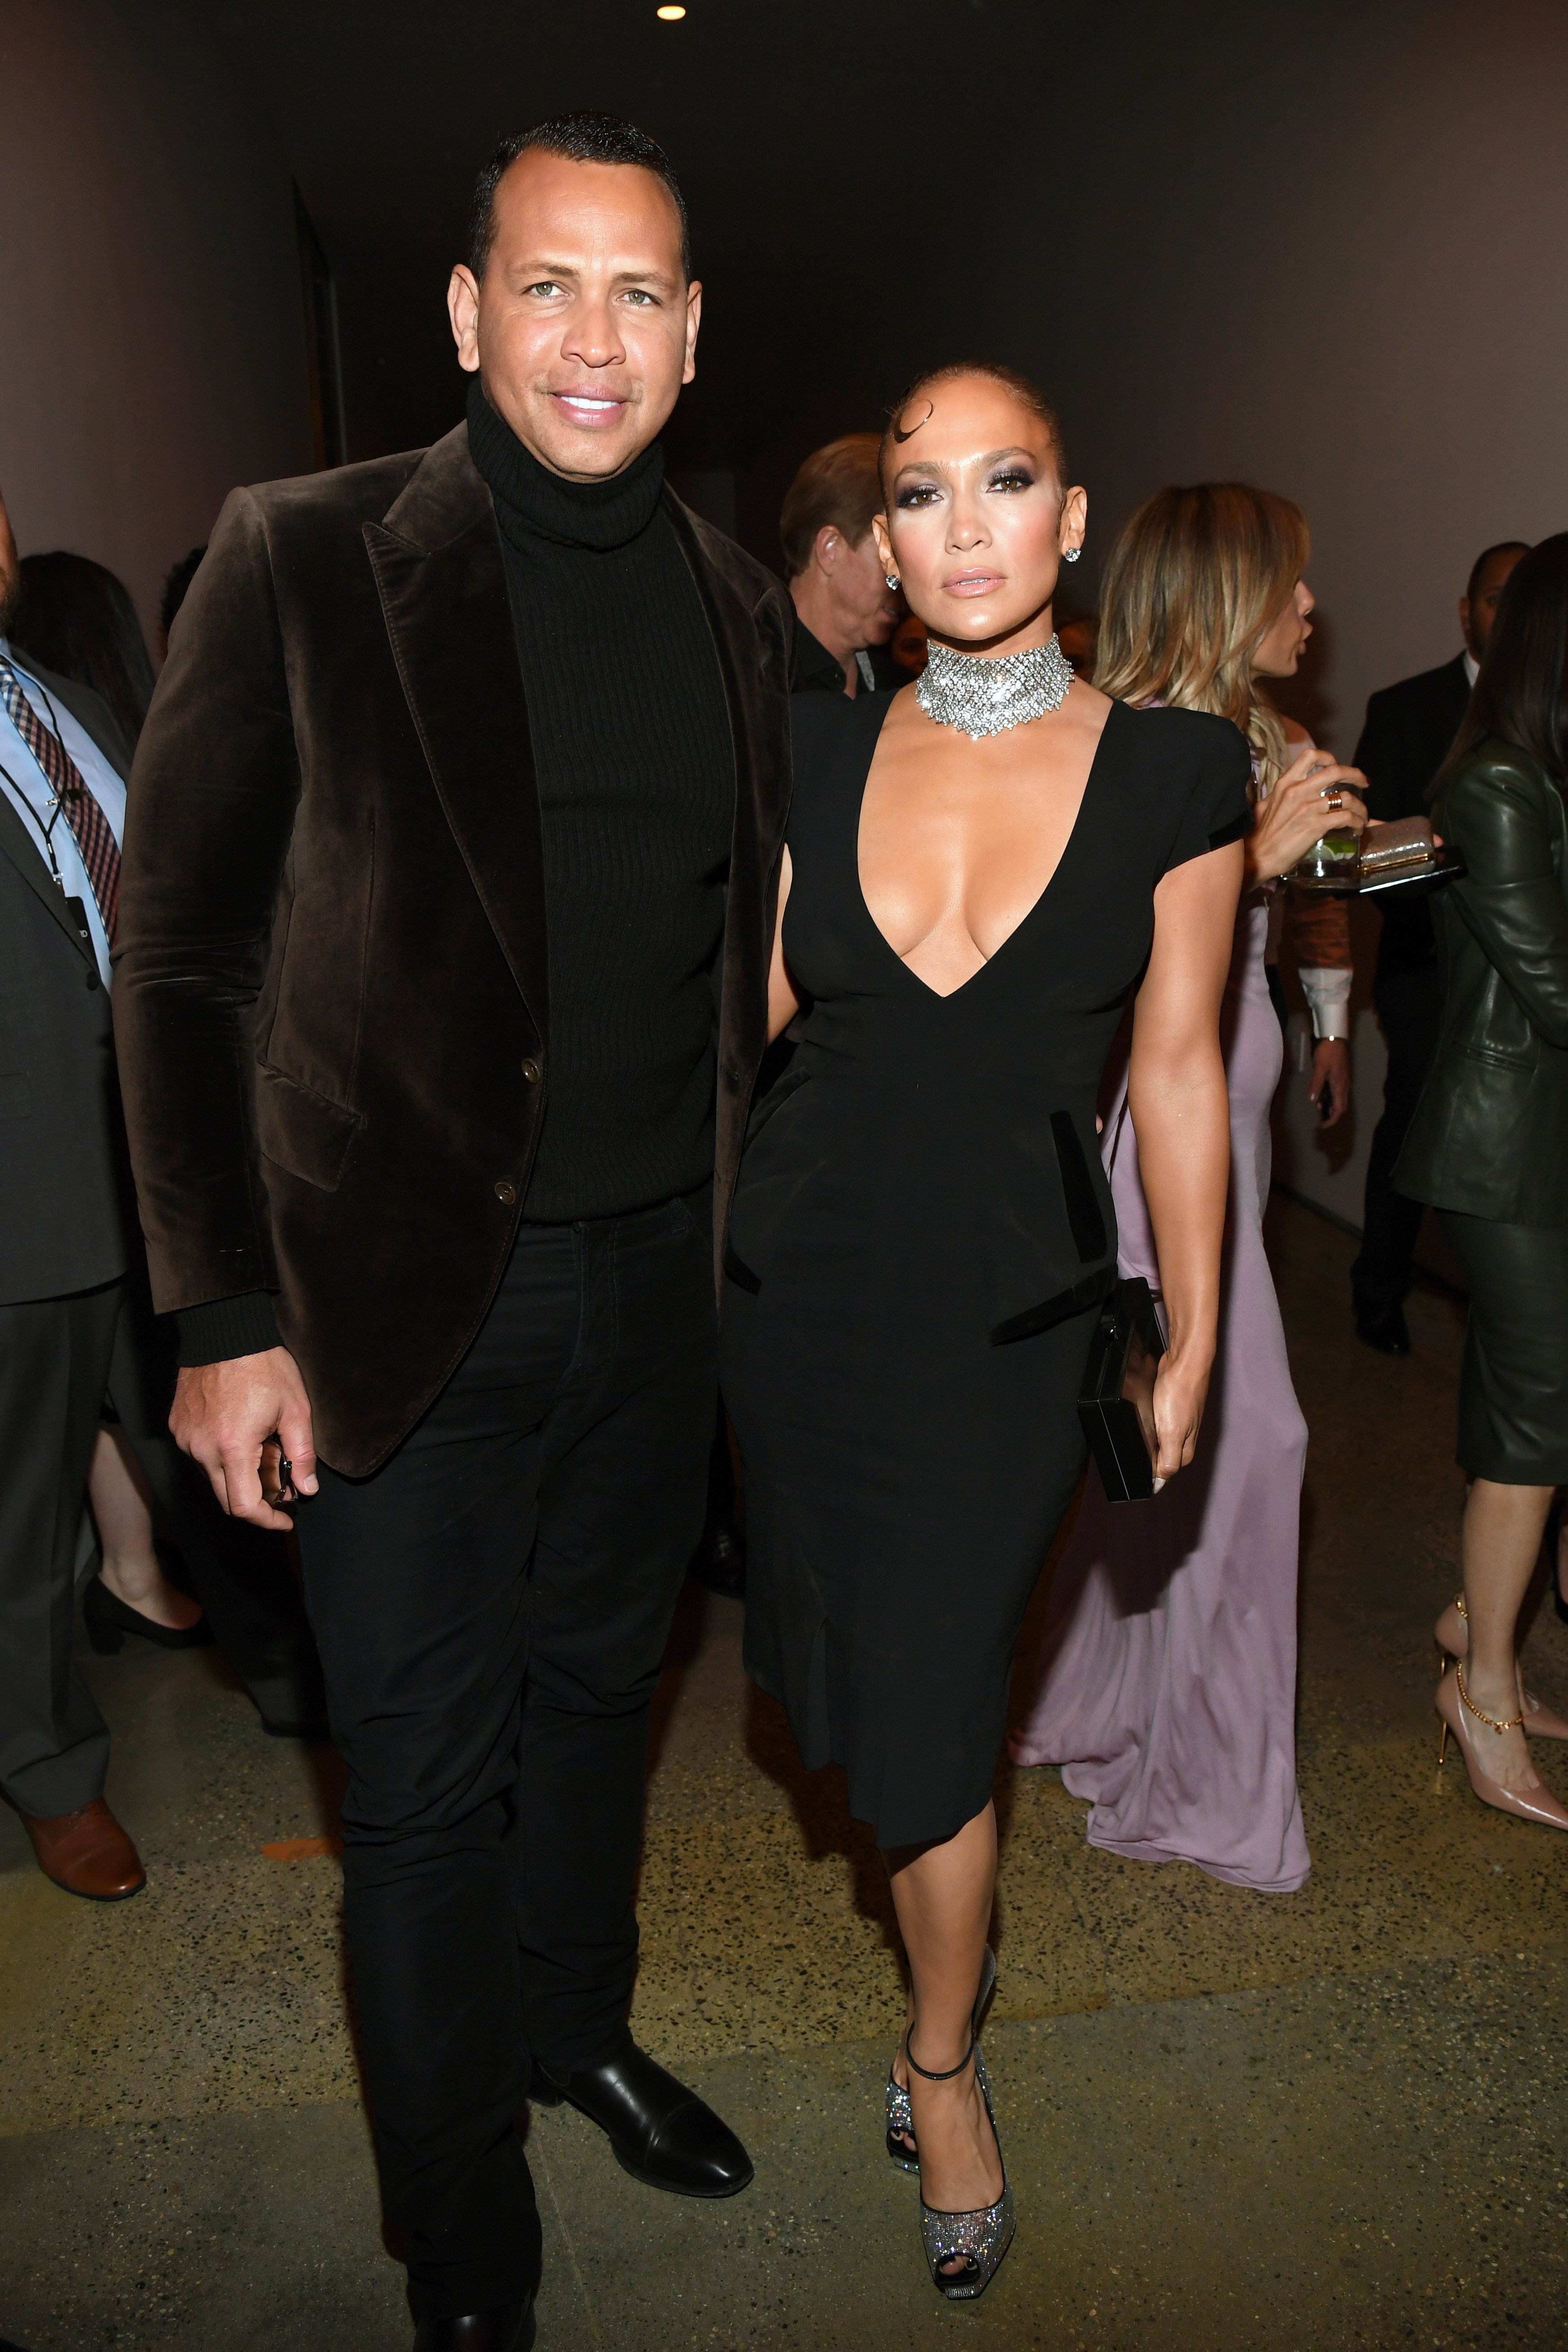 Alex Rodriguez and Jennifer Lopez attend the Tom Ford AW20 Show at Milk Studios on February 07, 2020, in Hollywood, California. | Source: Getty Images